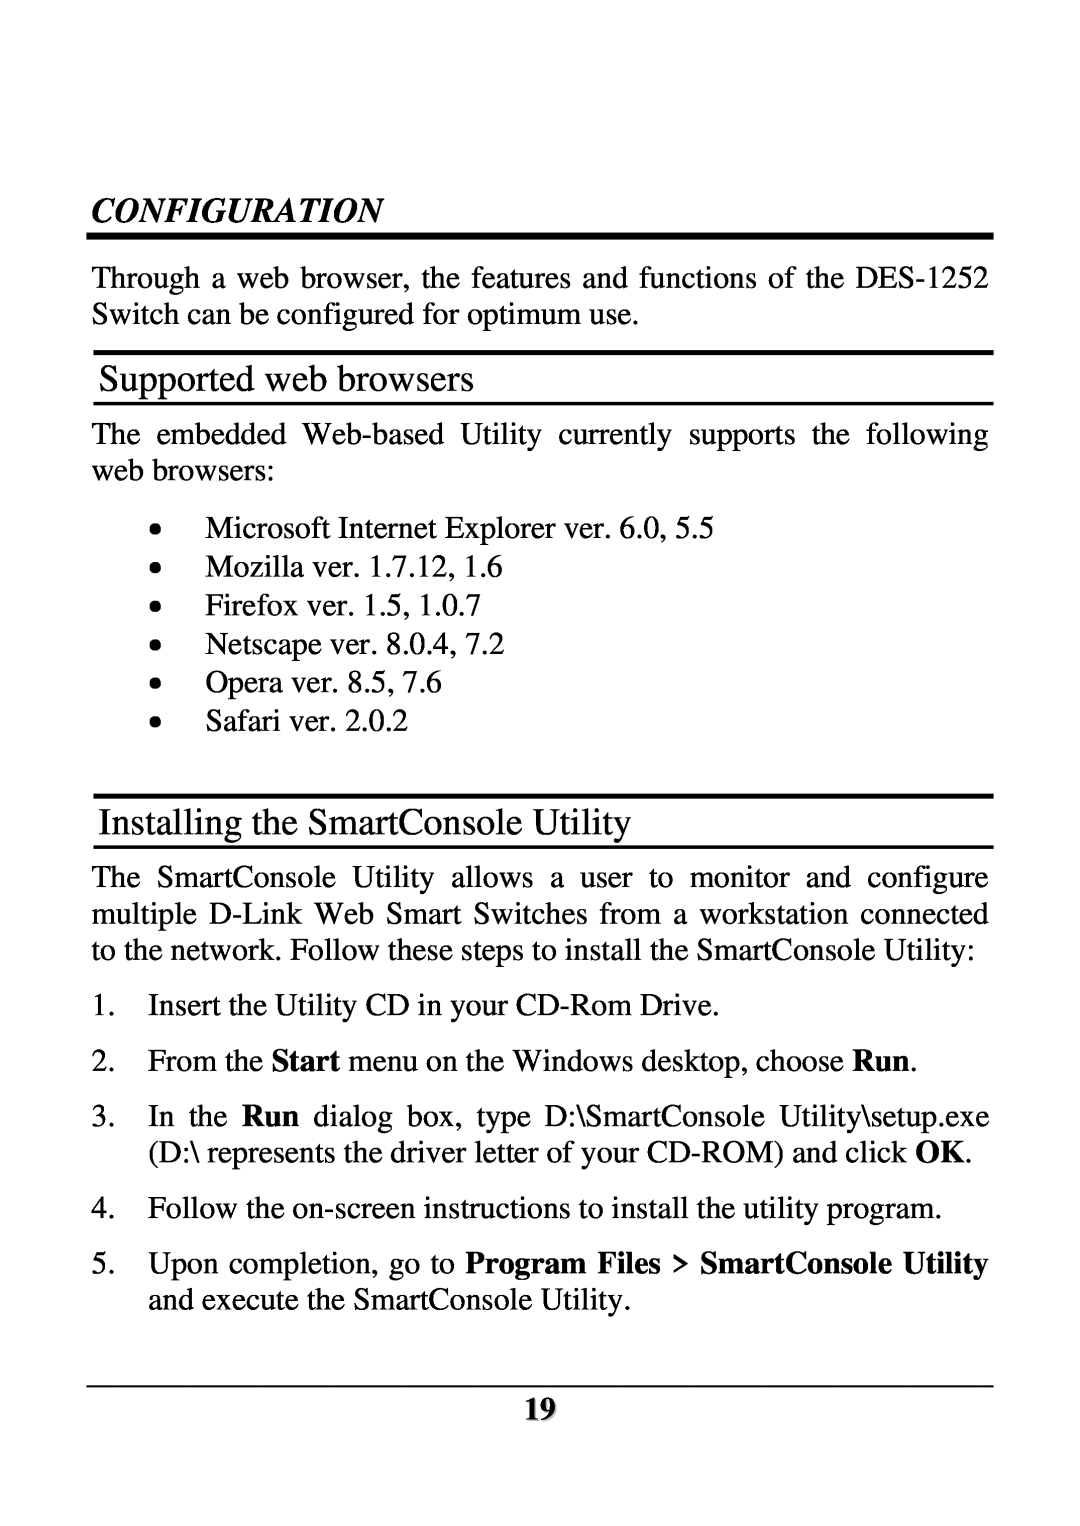 D-Link DES-1252 user manual Supported web browsers, Installing the SmartConsole Utility, Configuration 